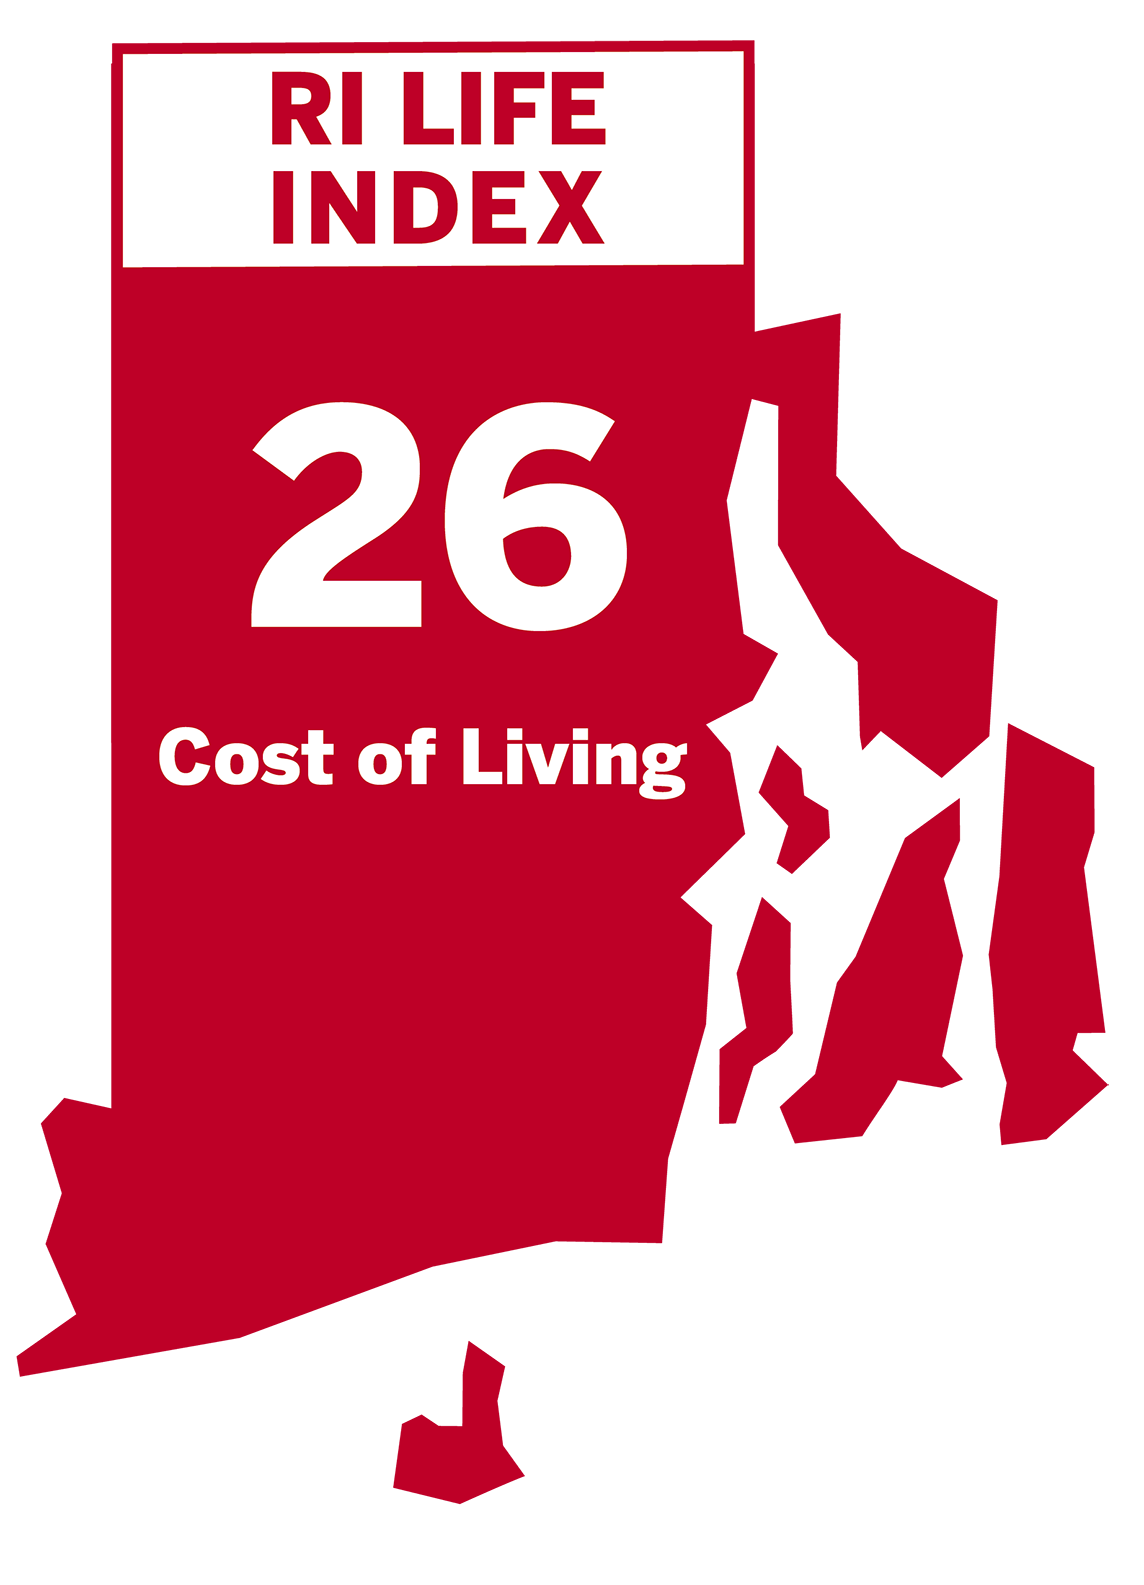 Cost of Living: 26